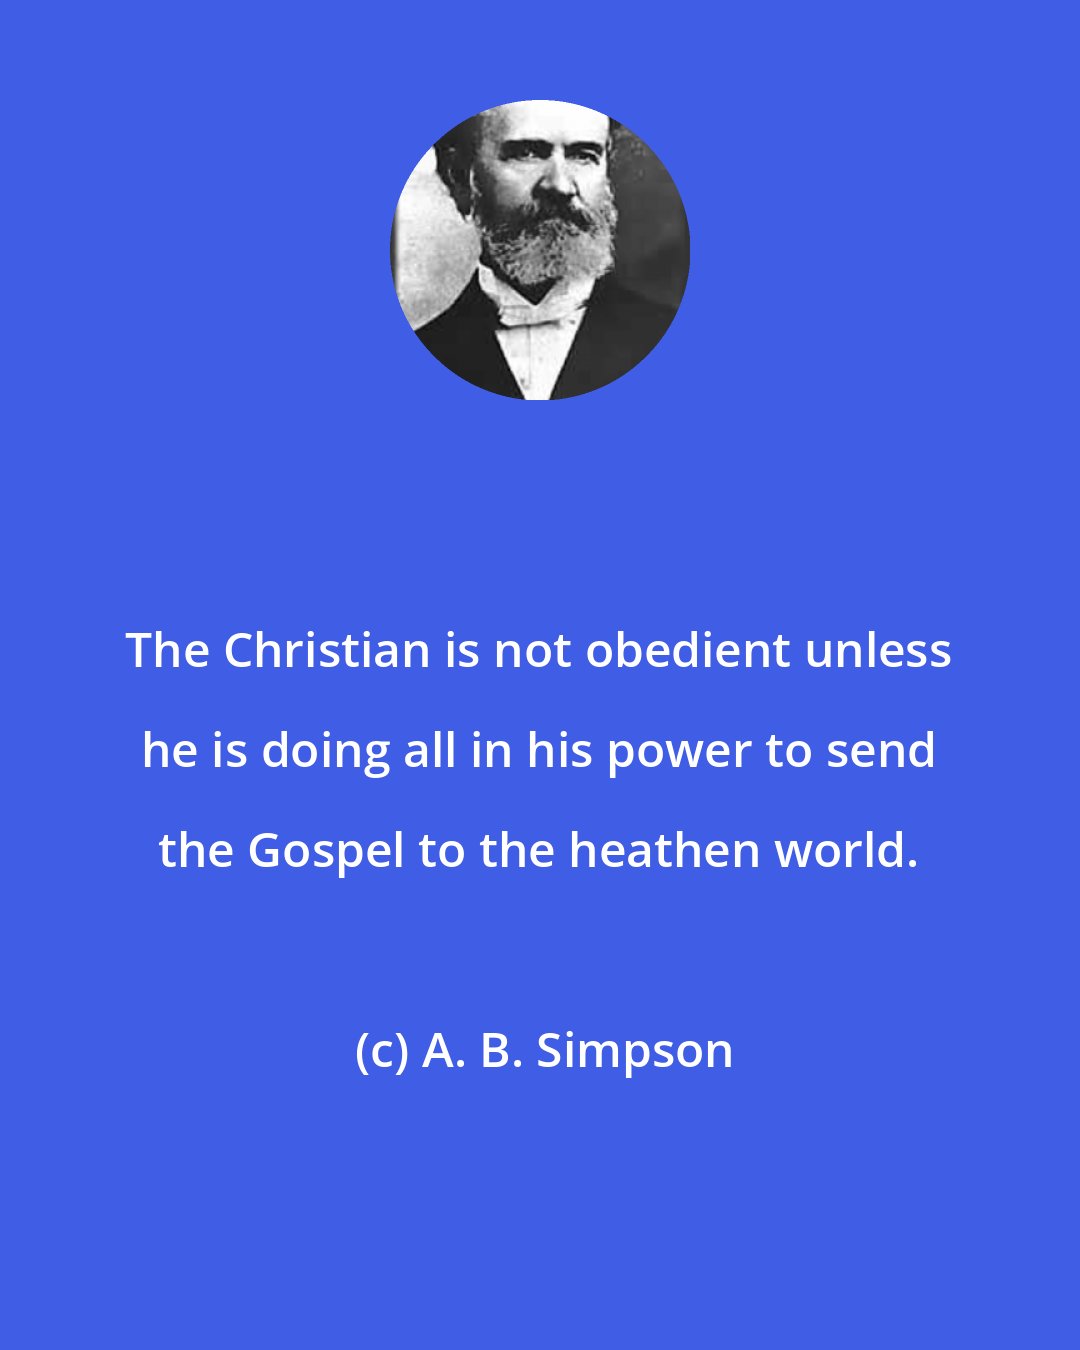 A. B. Simpson: The Christian is not obedient unless he is doing all in his power to send the Gospel to the heathen world.